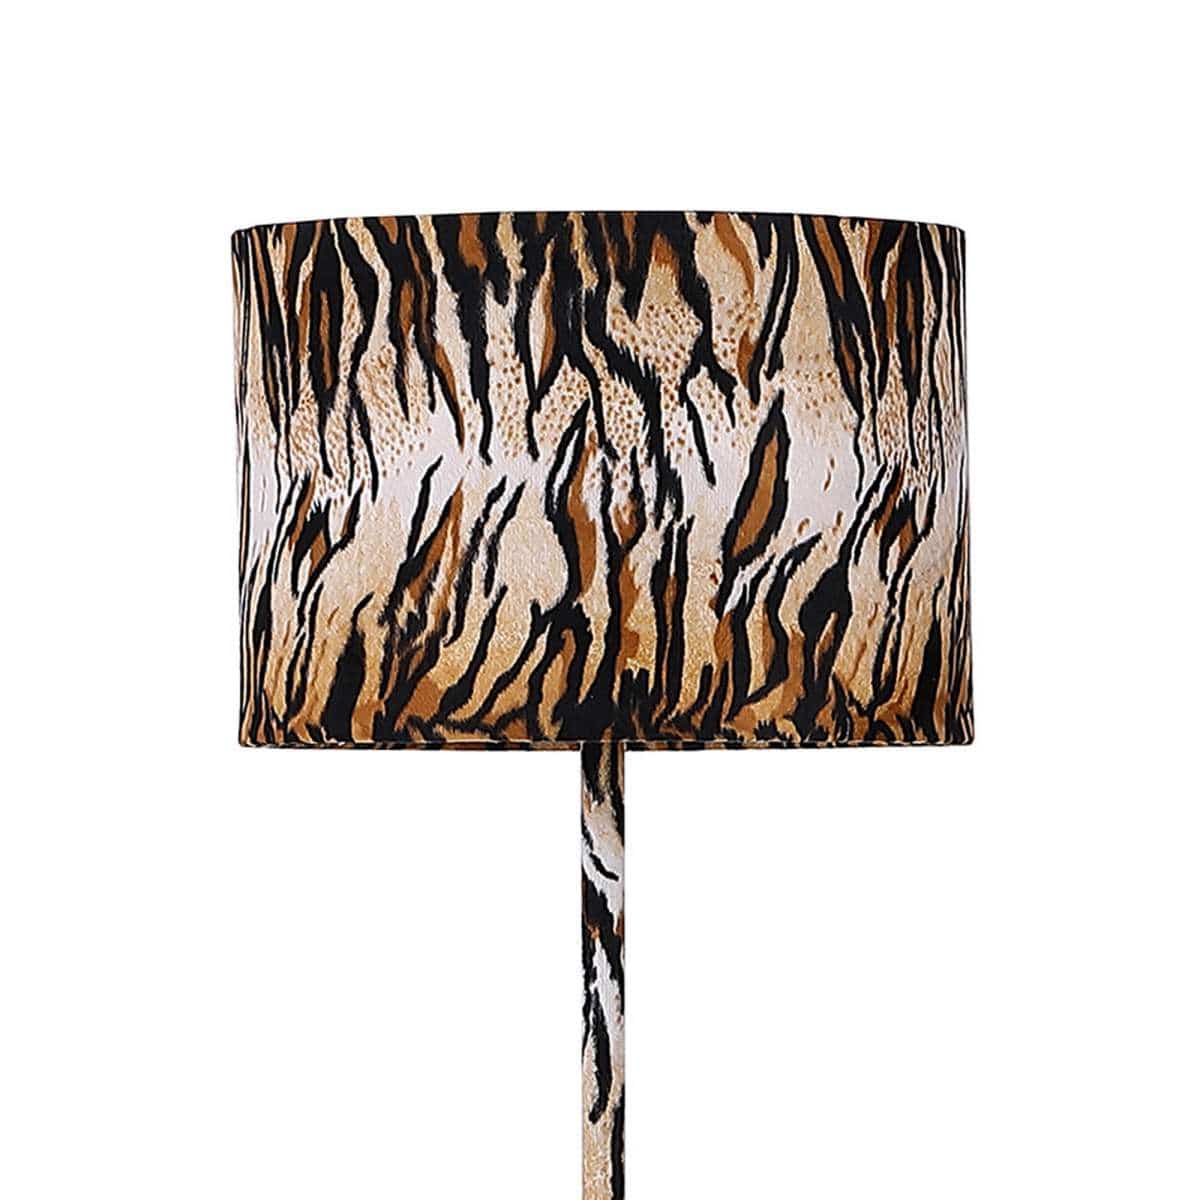 Benzara Fabric Wrapped Floor Lamp With Animal Print, Yellow And Black By Benzara Floor Lamps BM233936